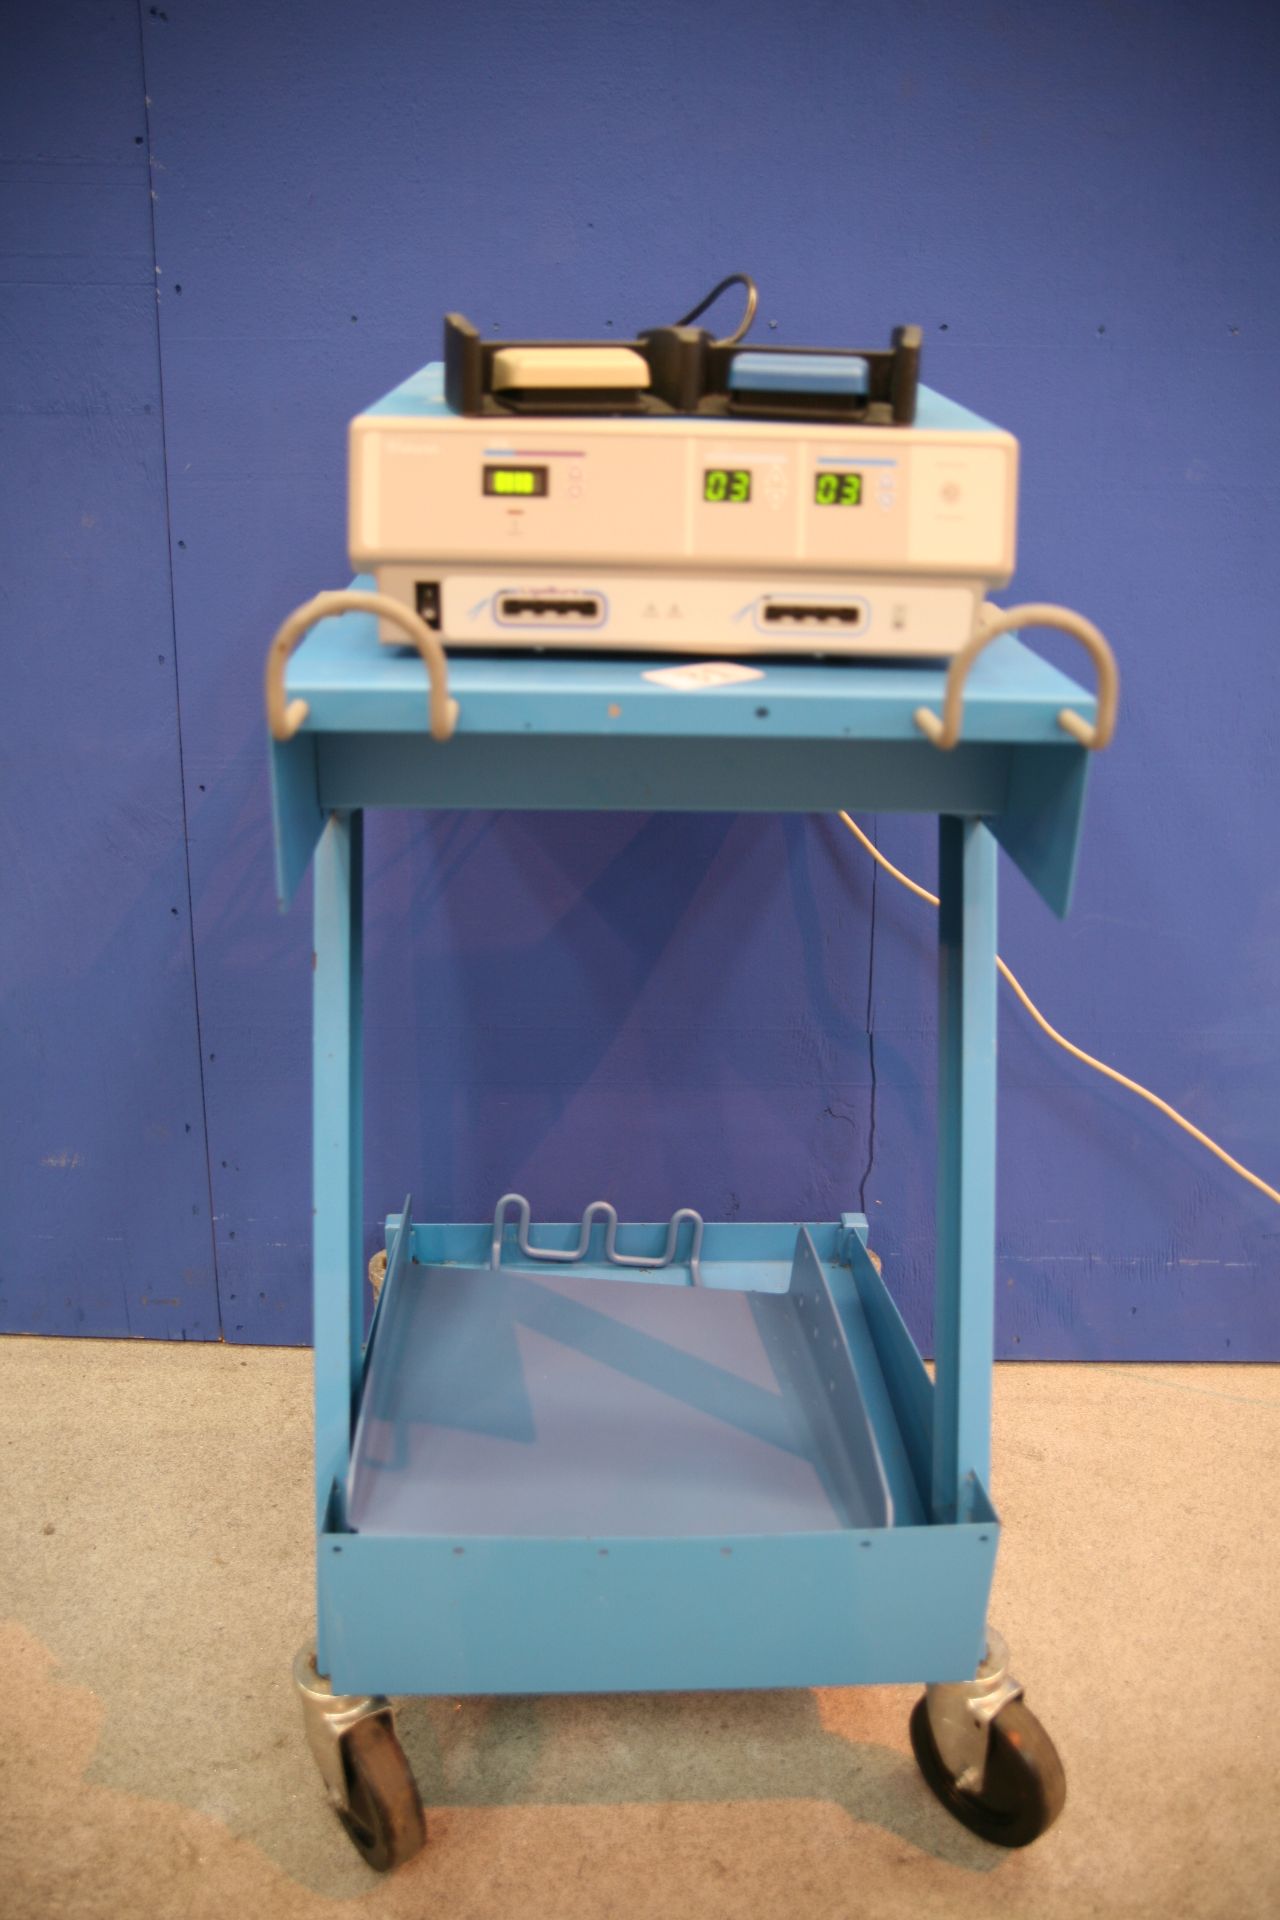 Valleylab Mobile Trolley With Valleylab Ligasure Vessal Sealing System with footswitches *Power